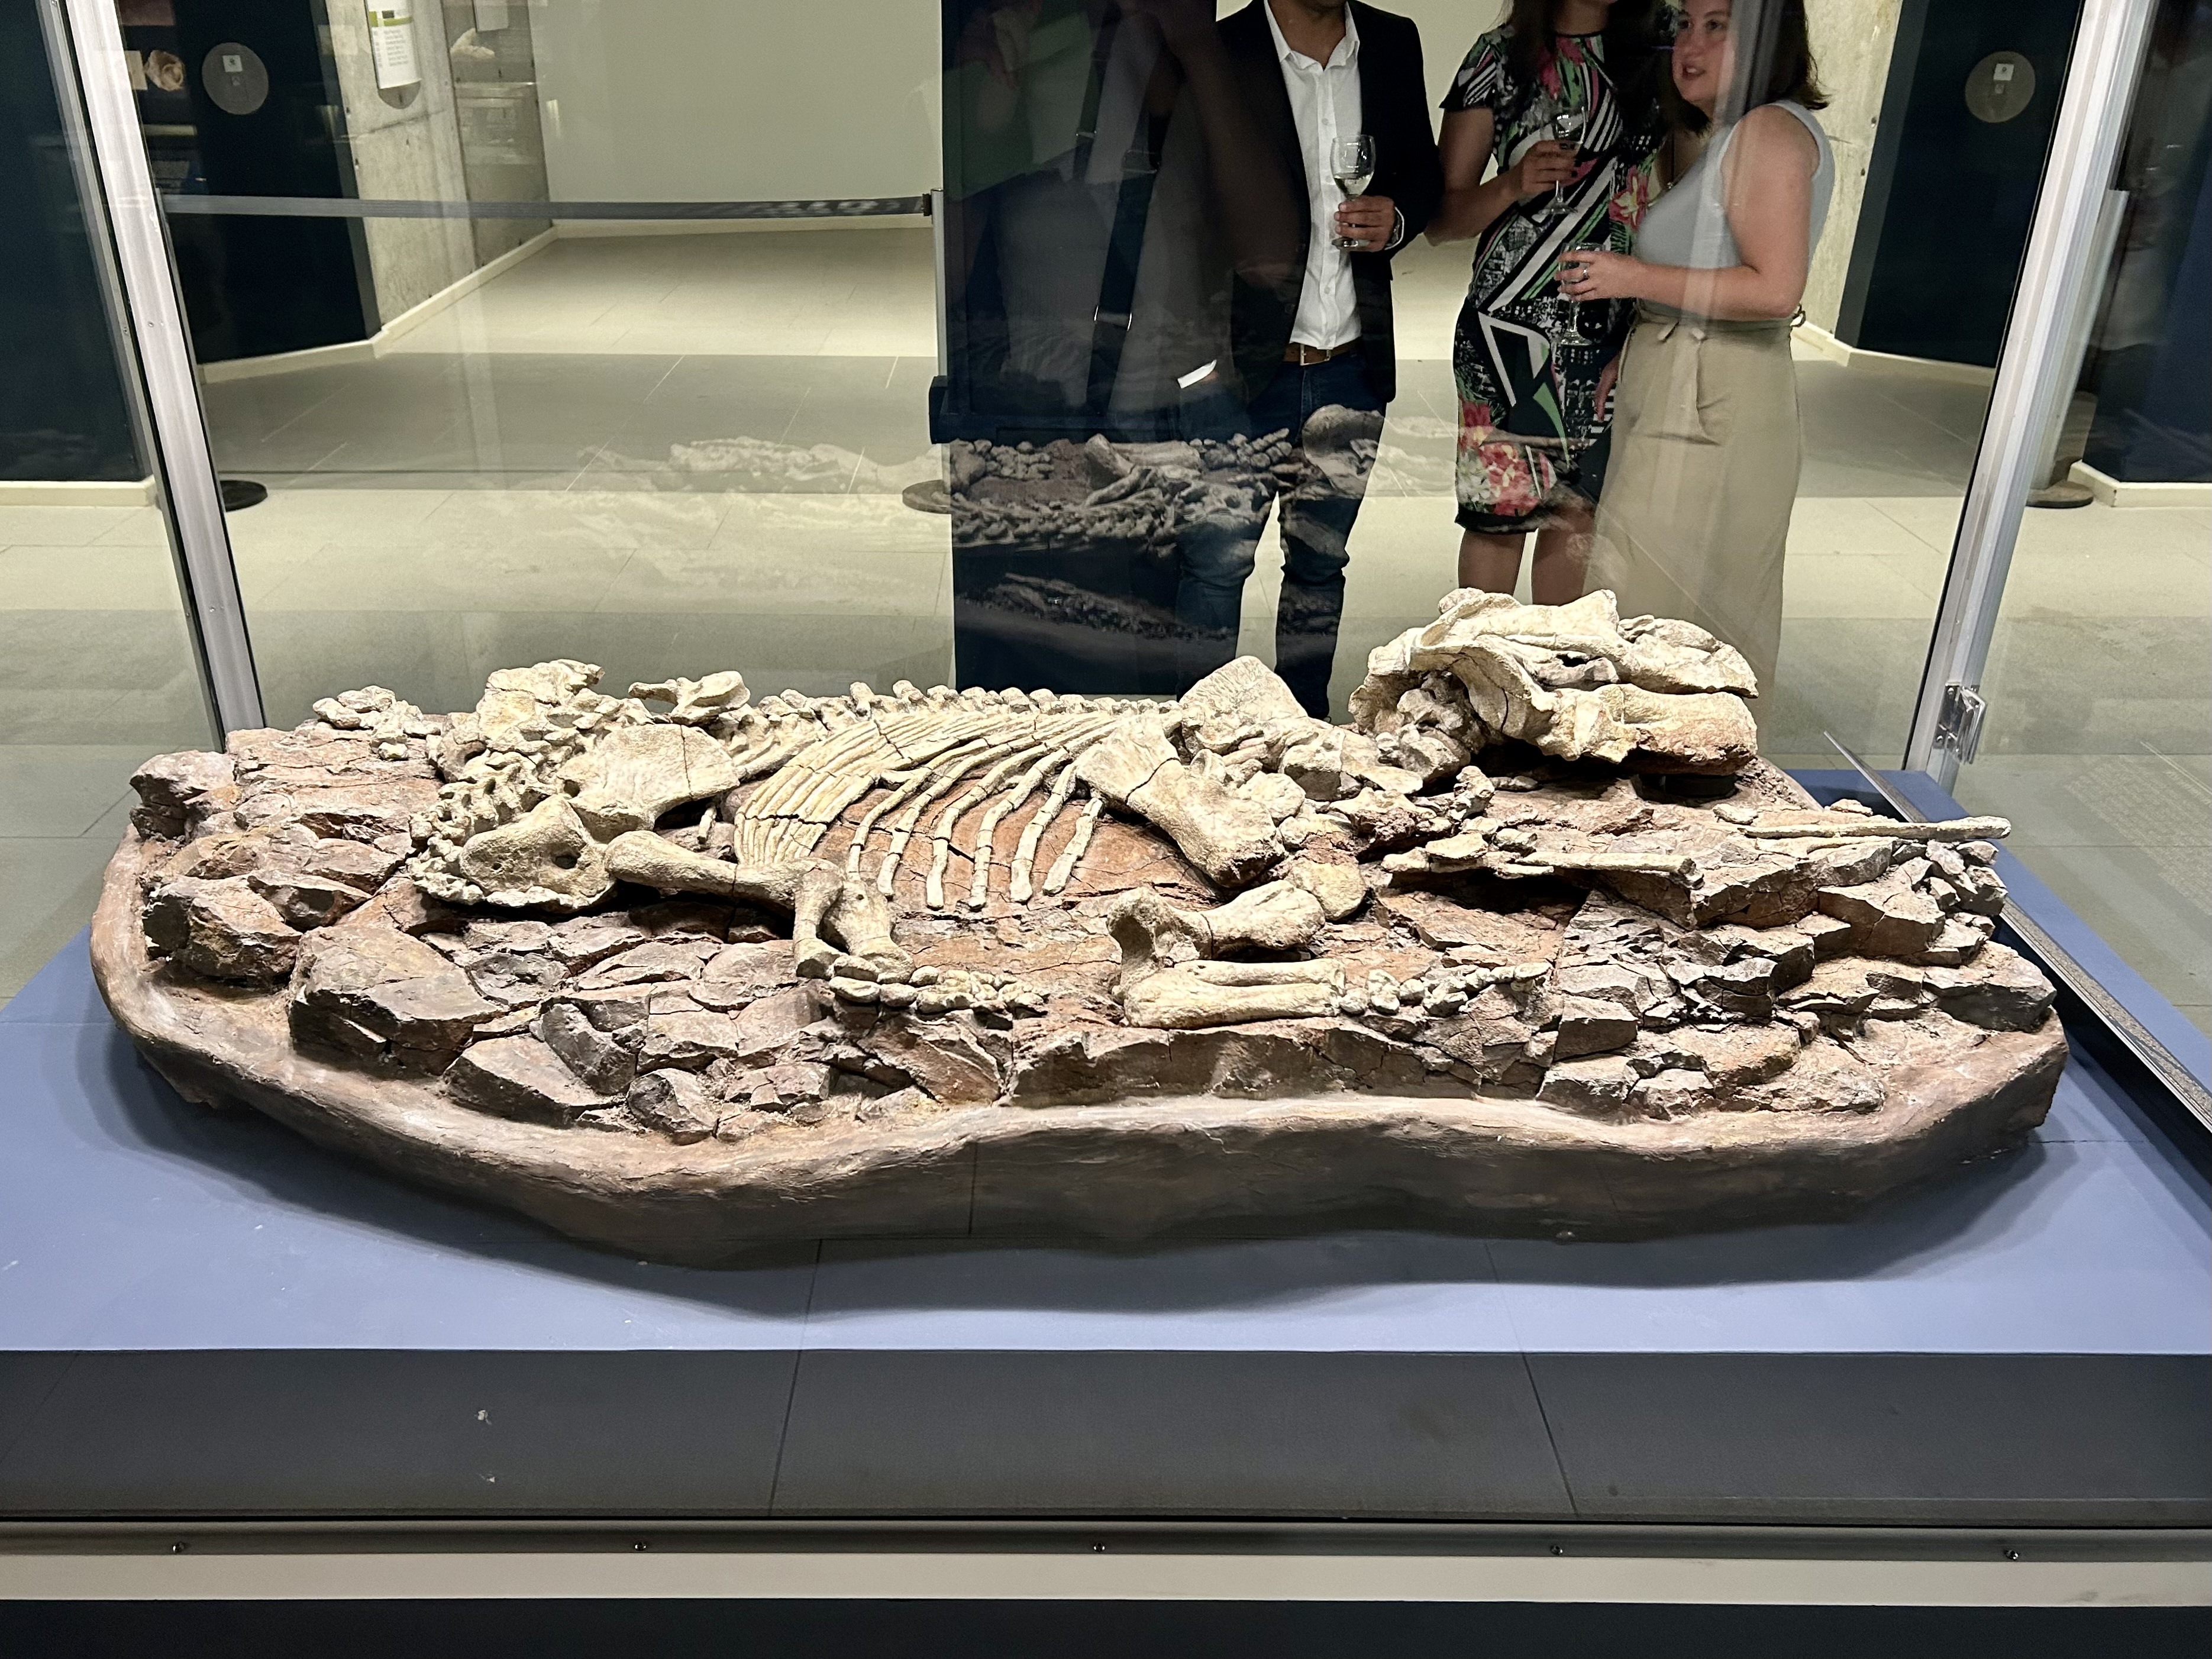 The most complete Endothiodon fossil ever found is on display at the “The Hidden Wonders of the Iziko South African Museum” exhibition. These mammals lived in the Karoo at a time before dinosaurs even existed, according to the display information. Image: Jean-Marie Uys